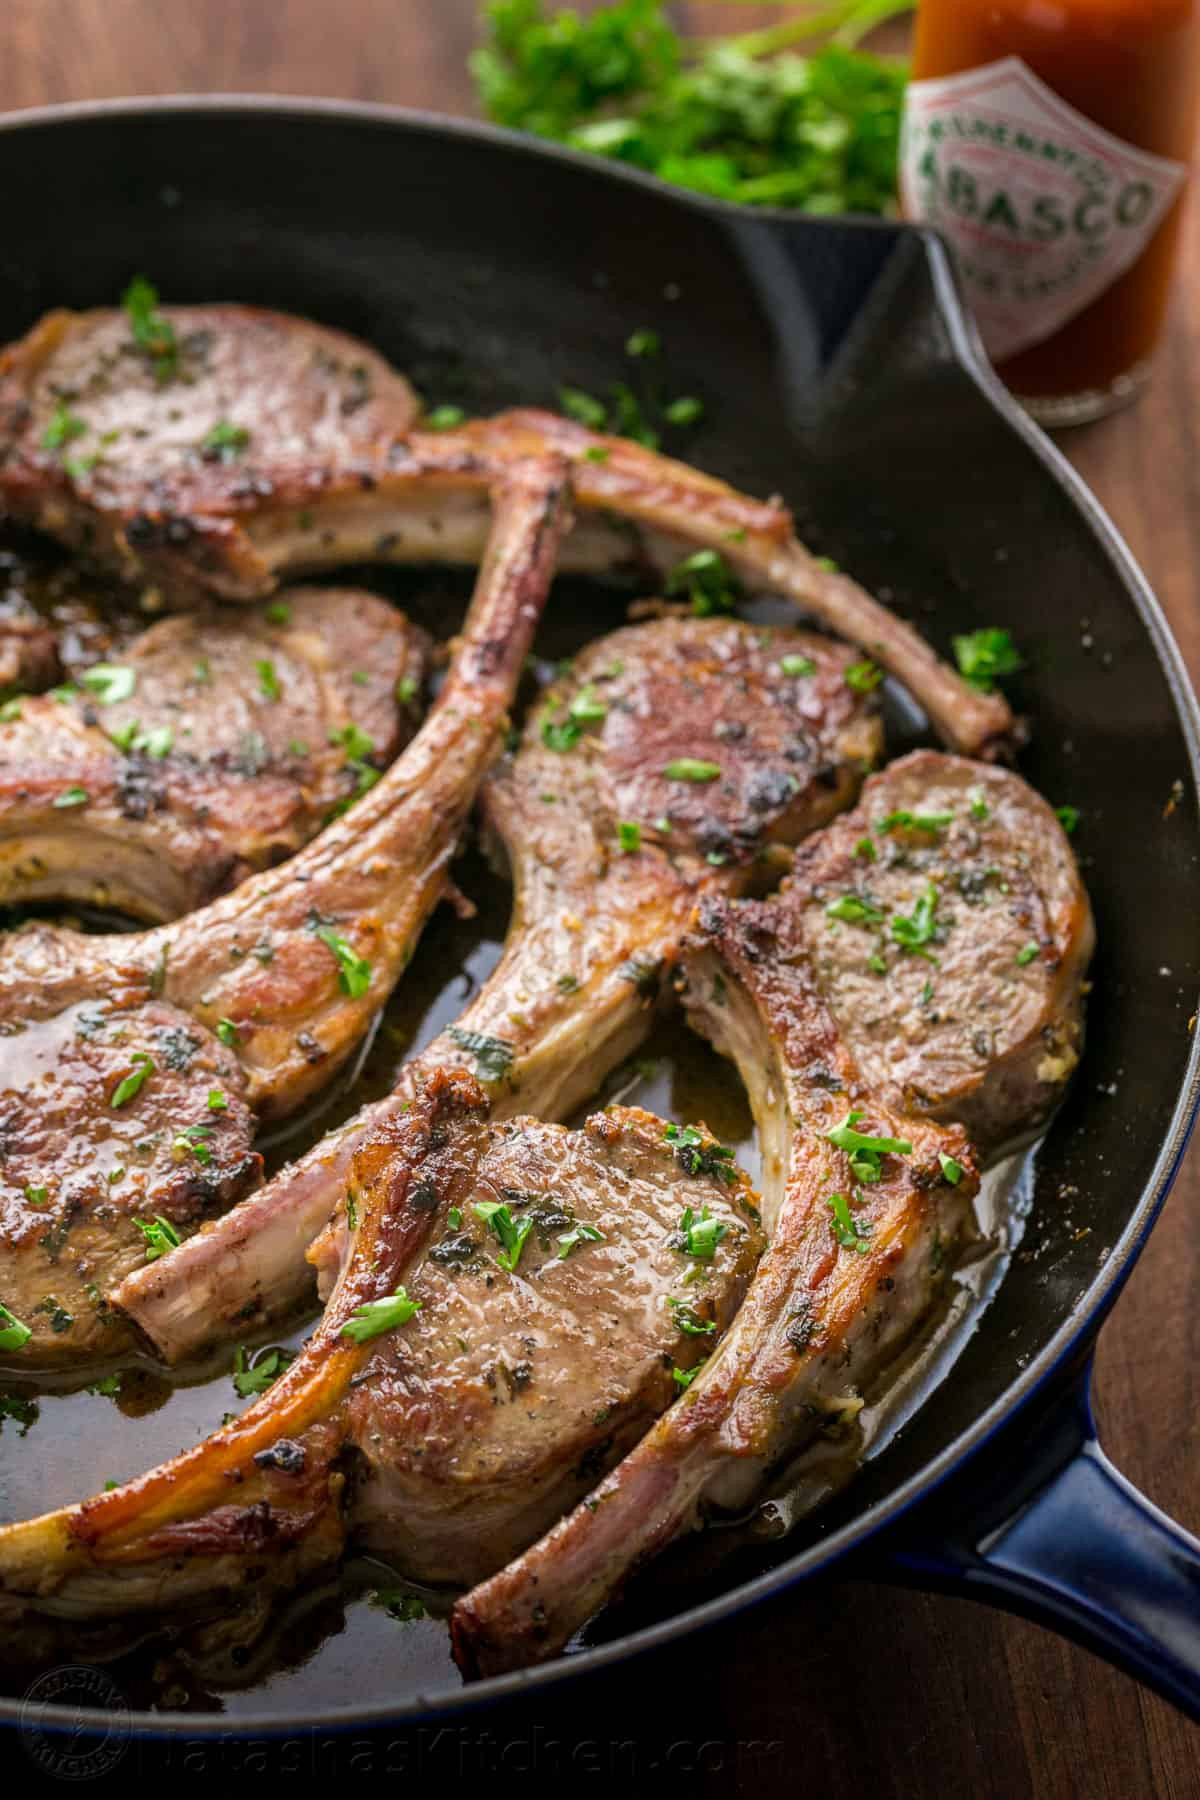 Best Sauces For Lamb
 Garlic and Herb Crusted Lamb Chops Recipe